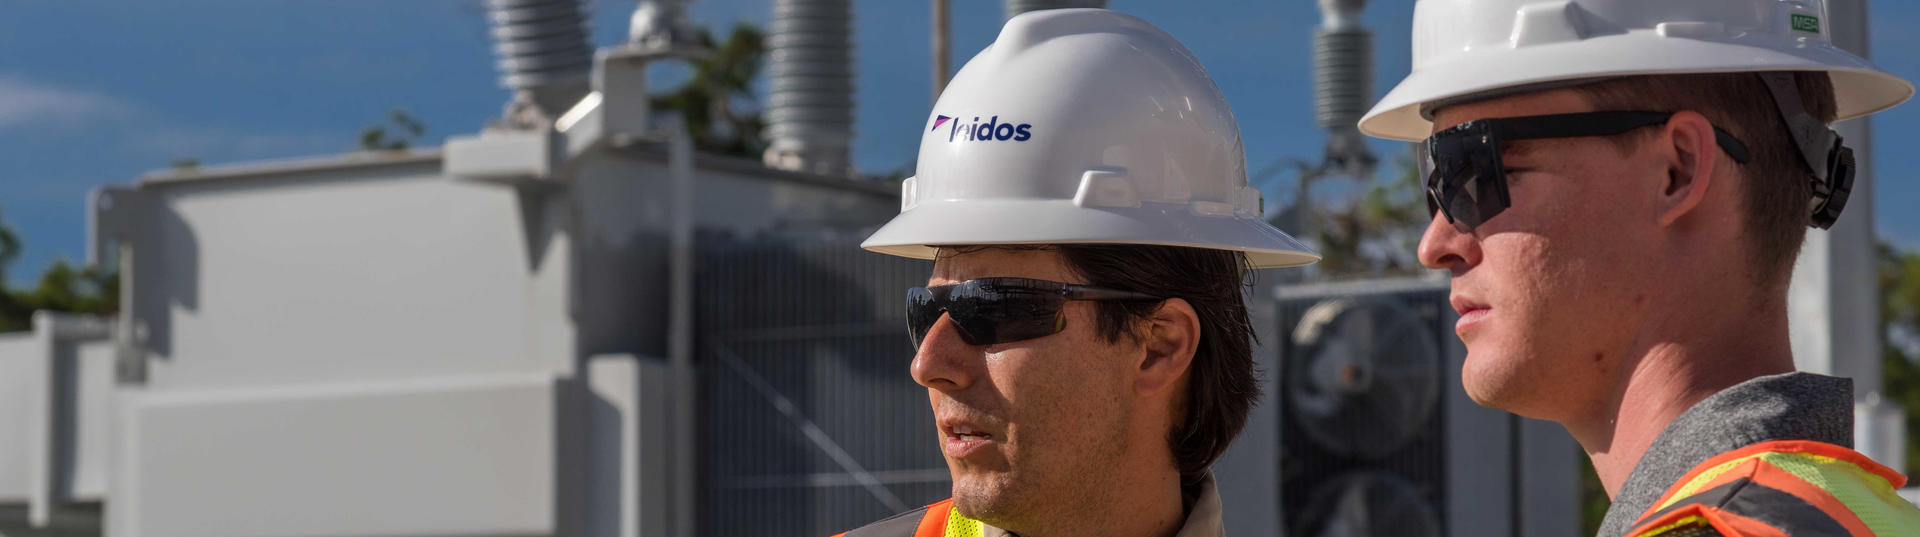 Leidos engineers with hard hats and safety vests at a substation